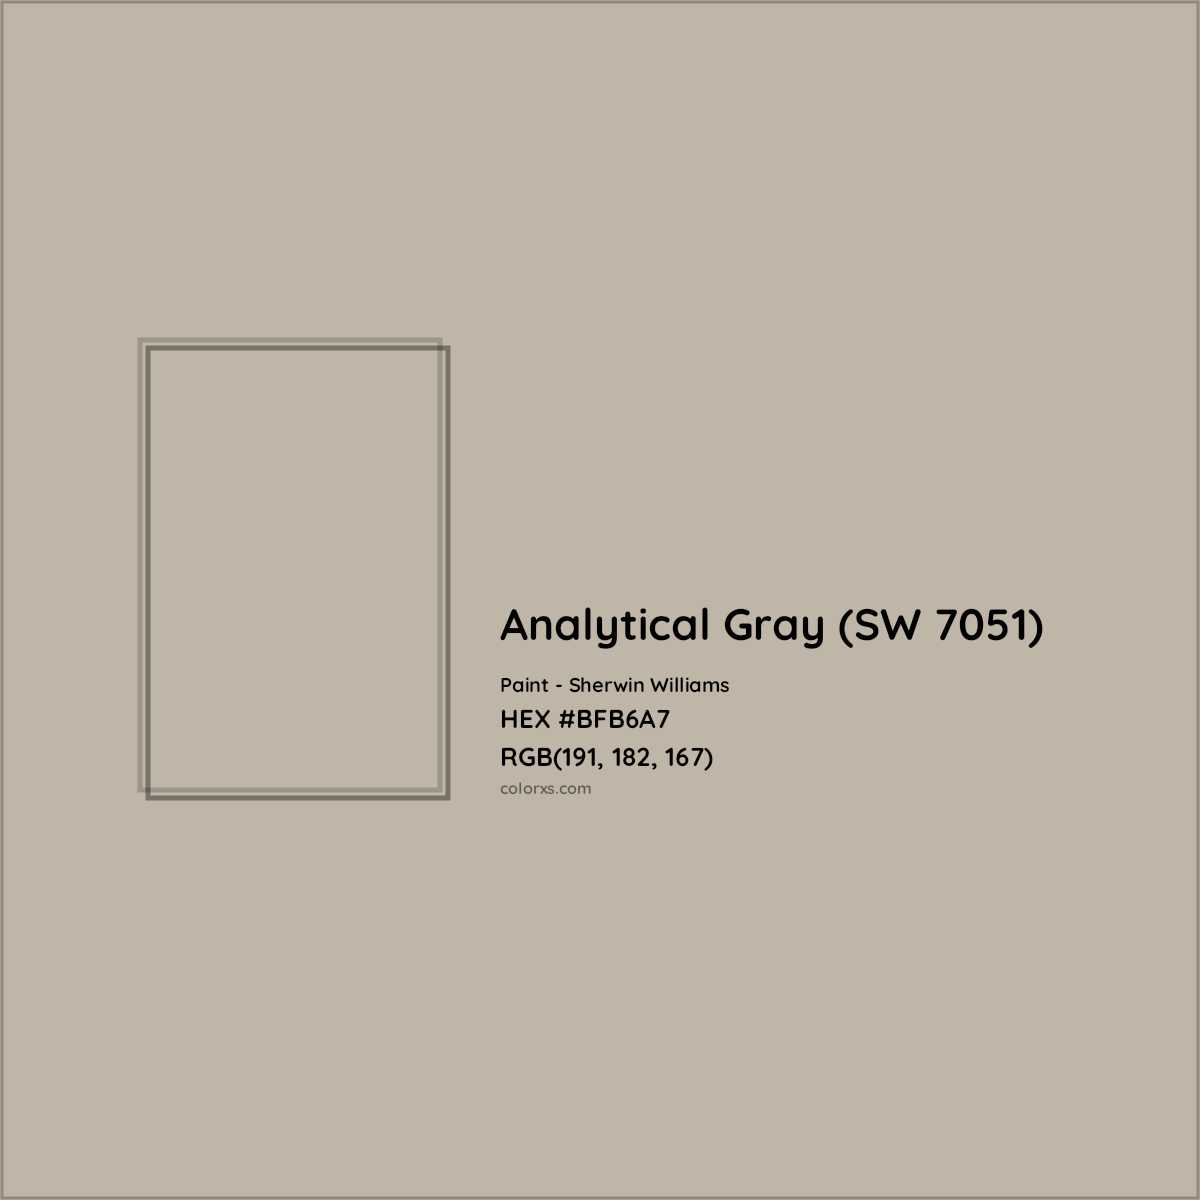 HEX #BFB6A7 Analytical Gray (SW 7051) Paint Sherwin Williams - Color Code